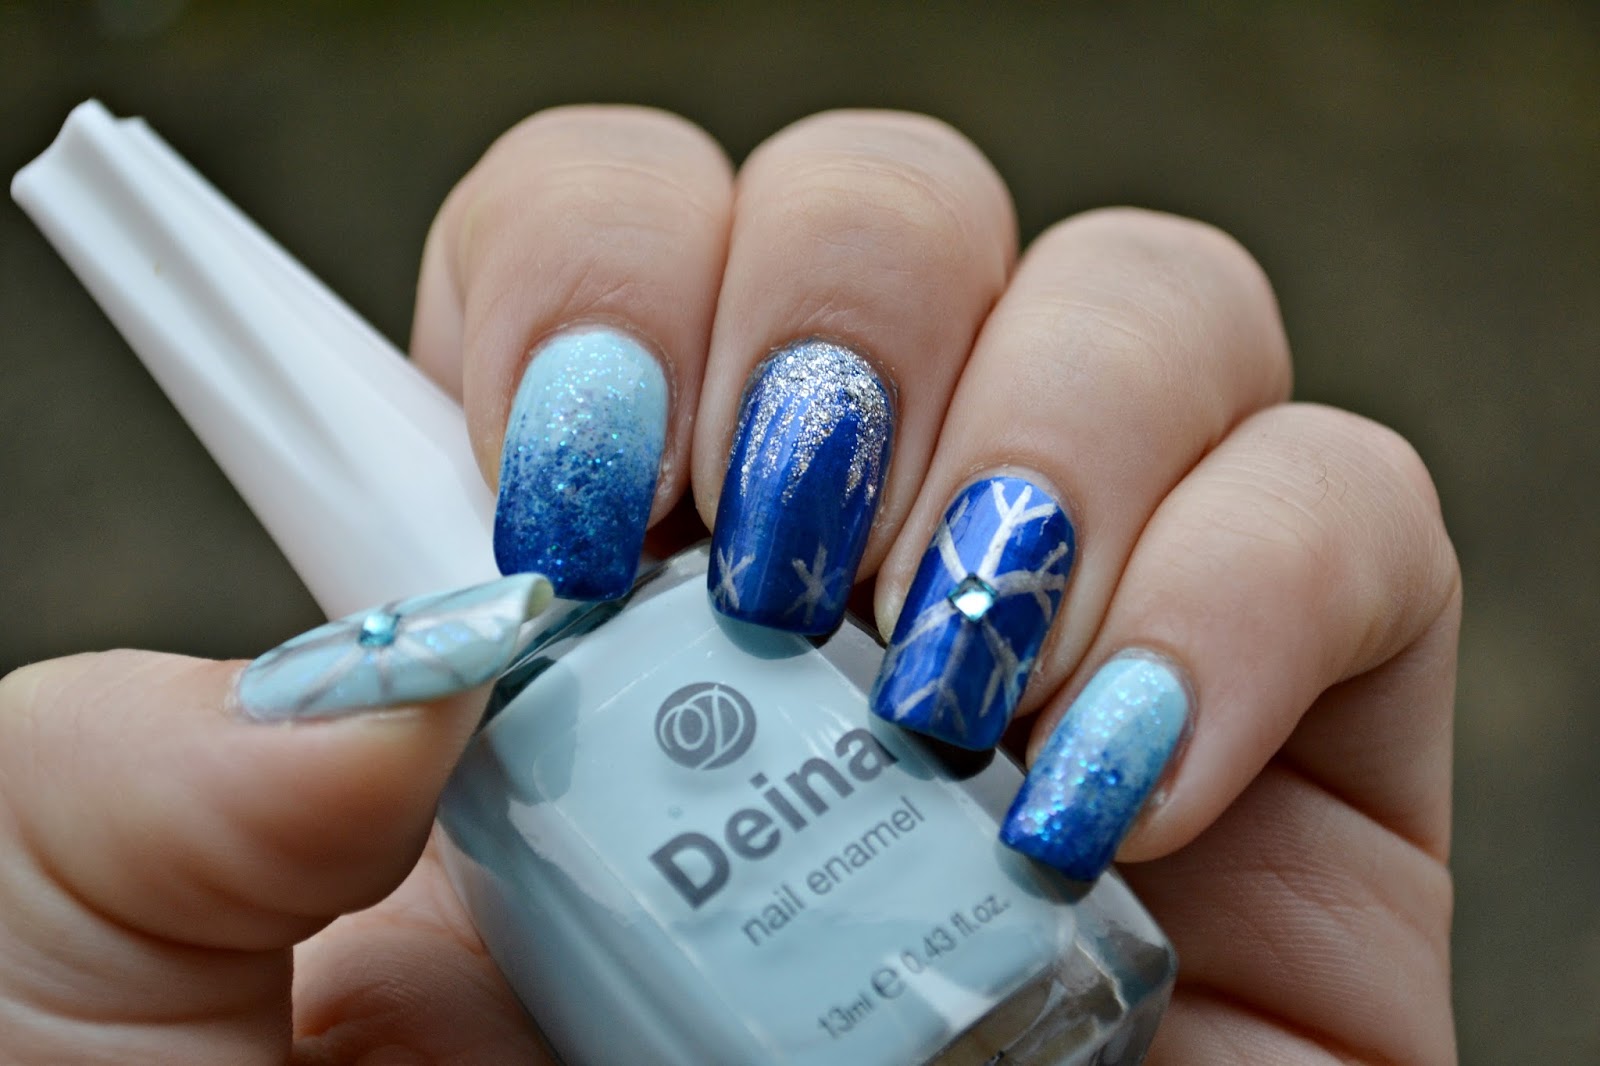 Searching For Spark: Frozen's Elsa nail art - Collab with Roseybelle